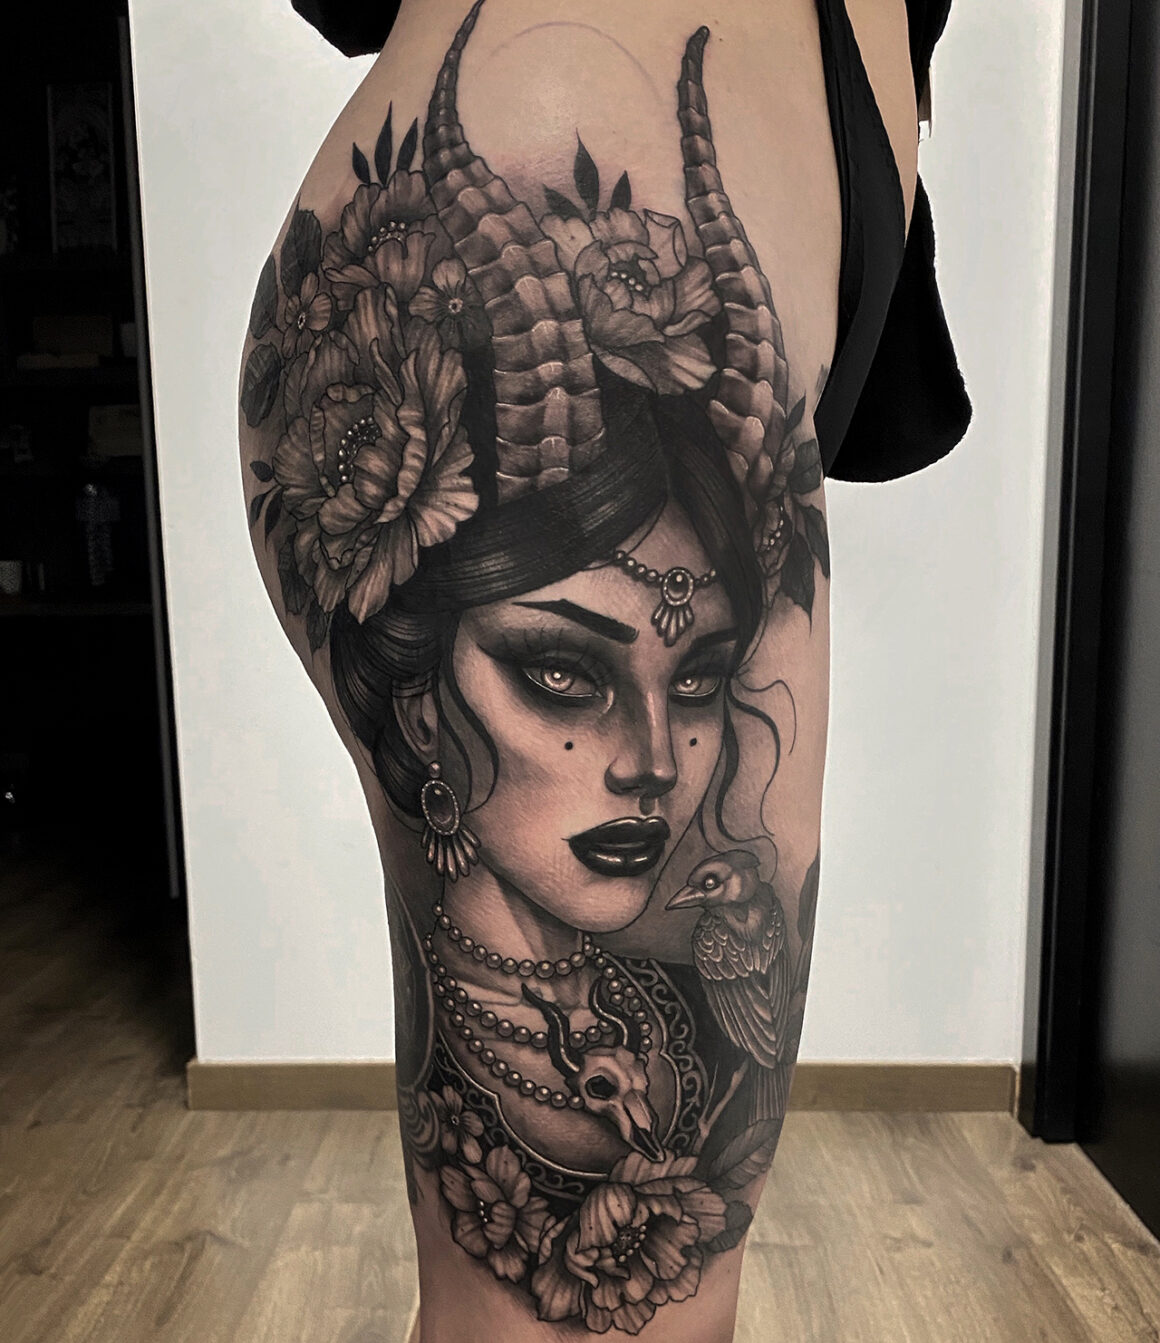 Tattoo by Ccyle, @ccyle